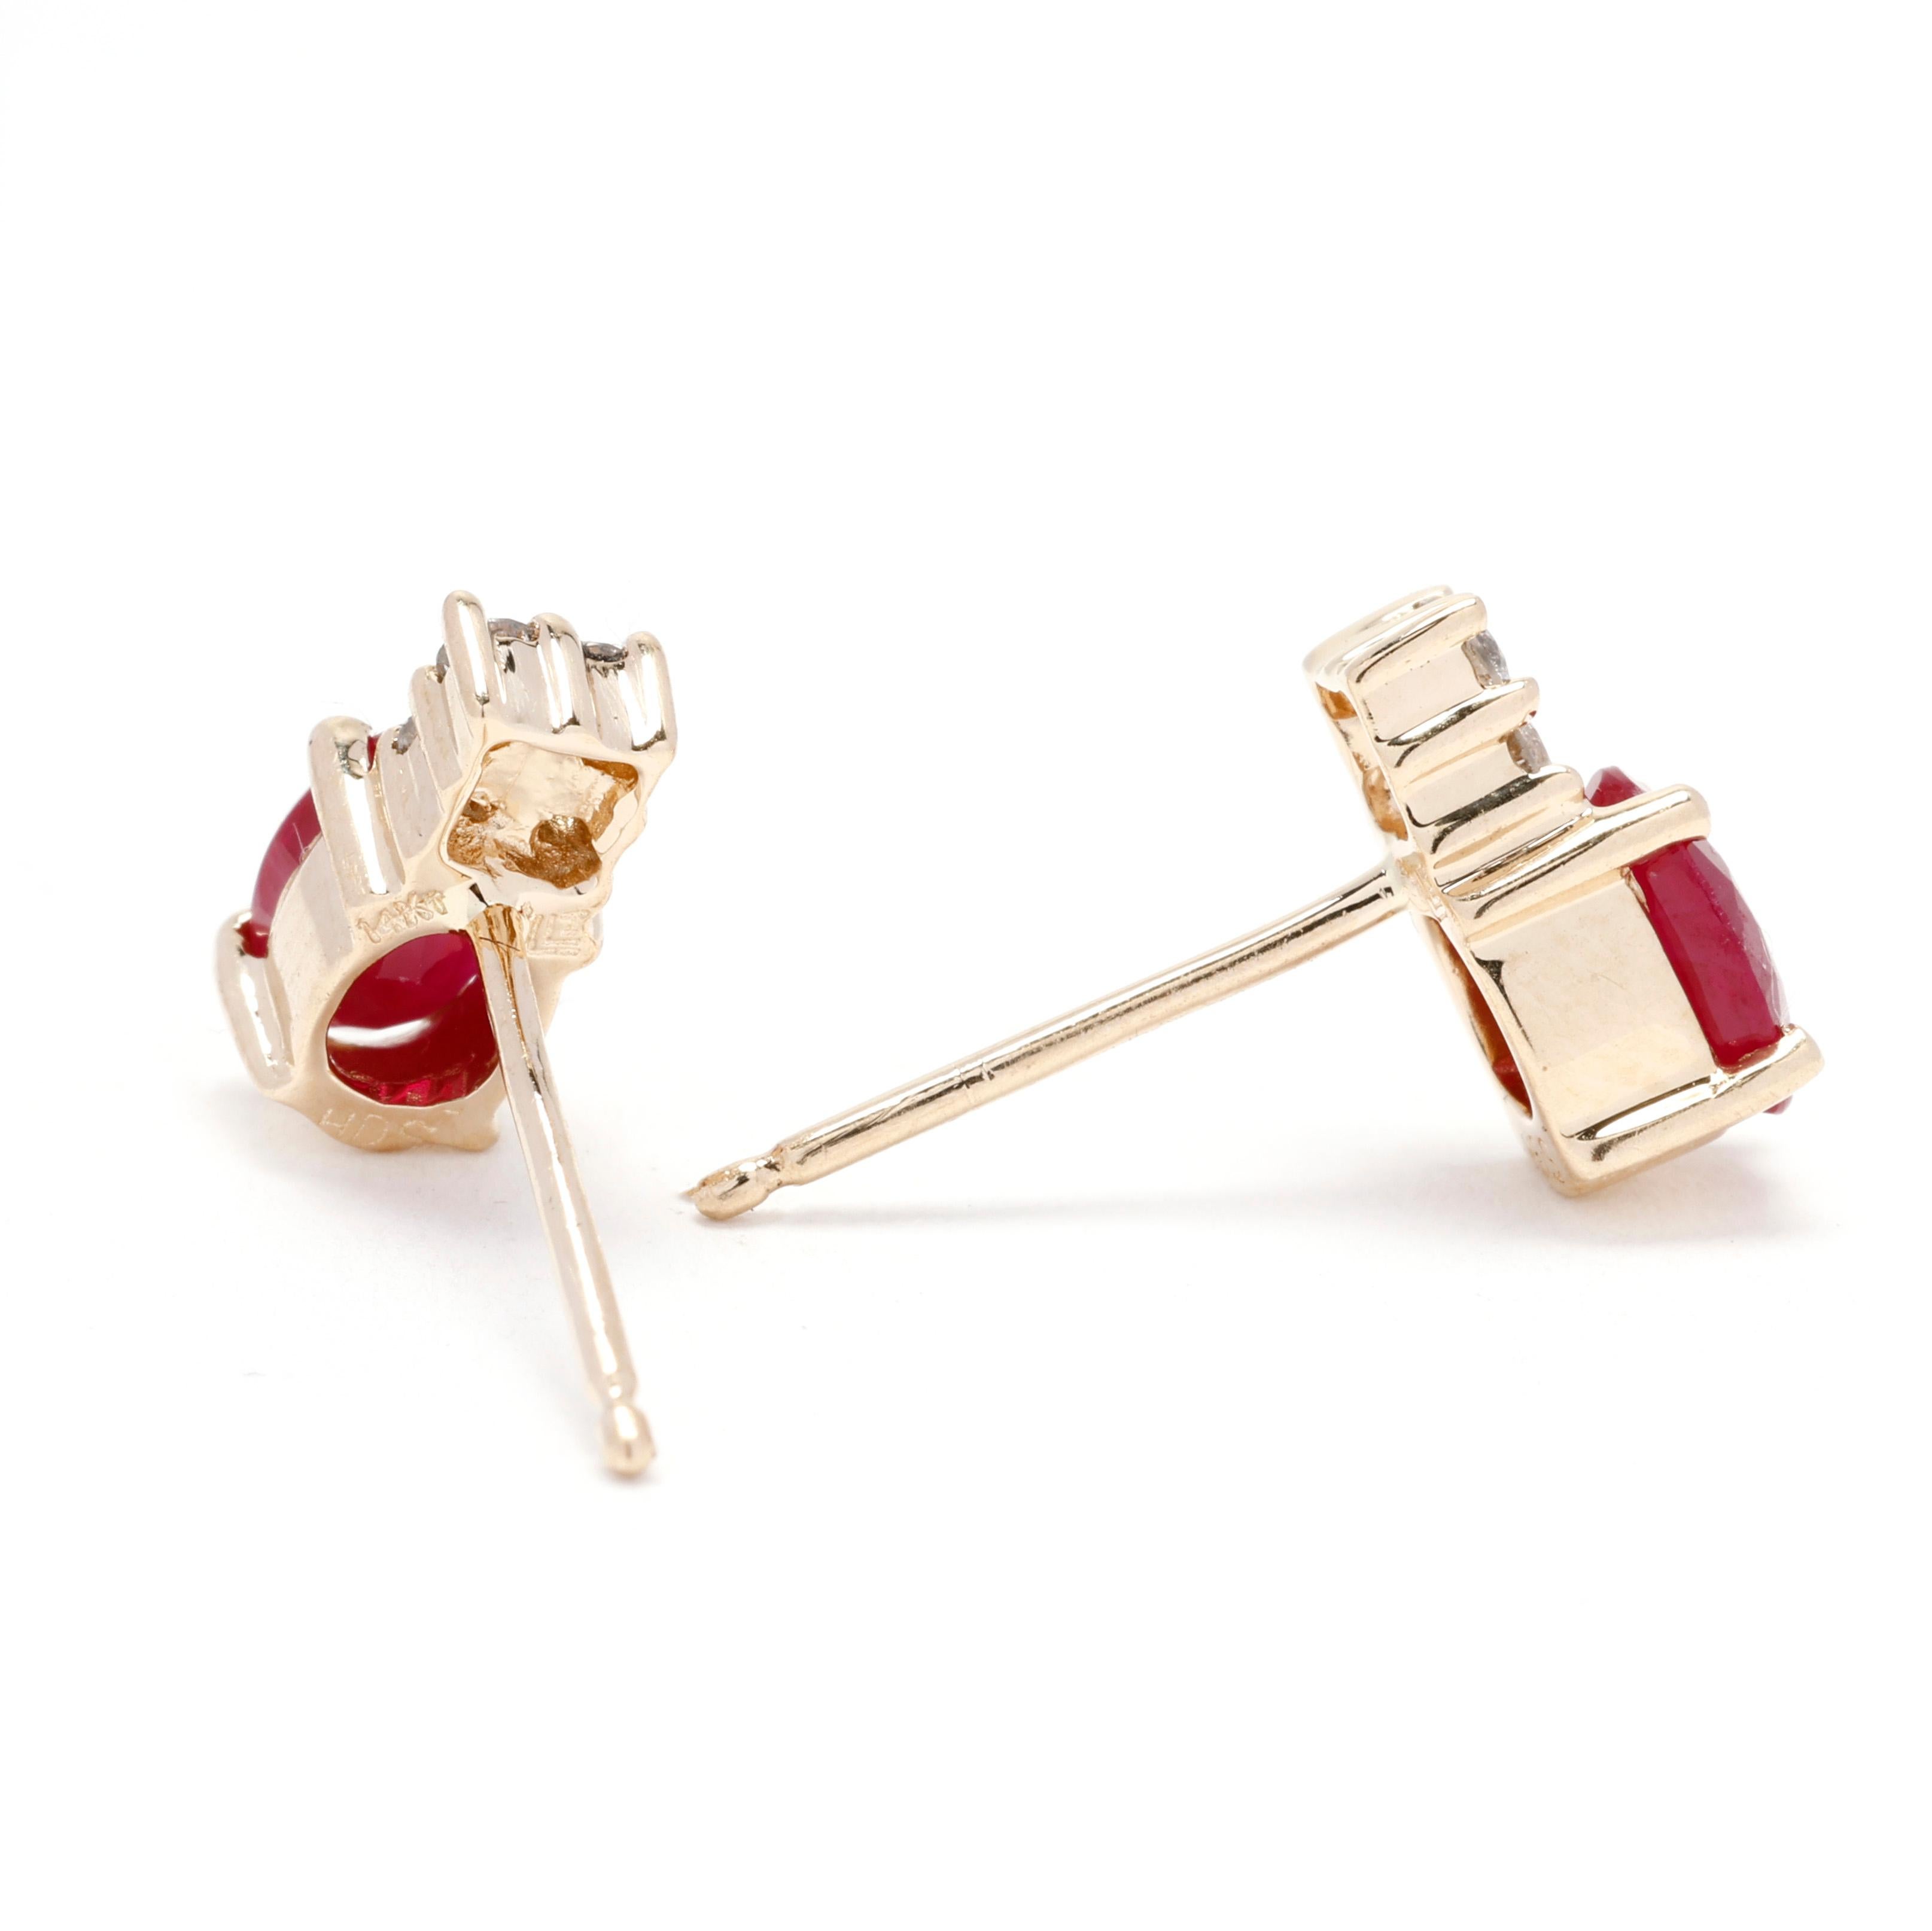 Elevate your jewelry collection with these exquisite 1.32ctw Diamond and Ruby Stud Earrings. Crafted in luxurious 14k yellow gold, these stunning earrings feature brilliant round diamonds surrounding vibrant red rubies, creating a captivating